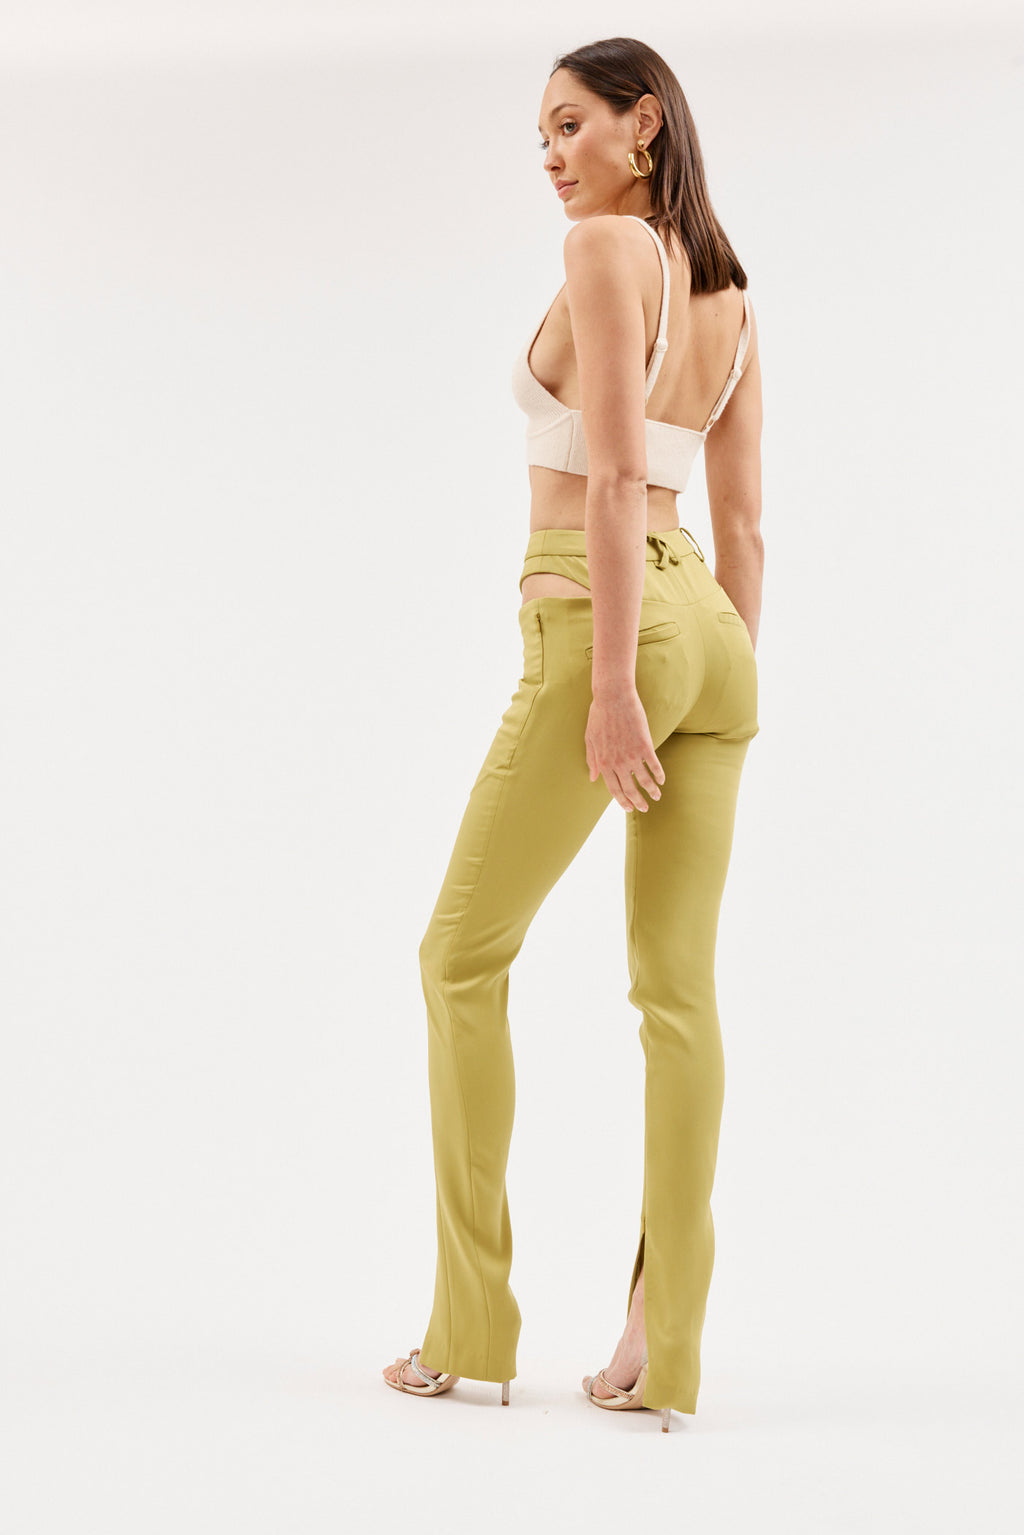 High Waist Lime Green Cut Out Fitted Pant